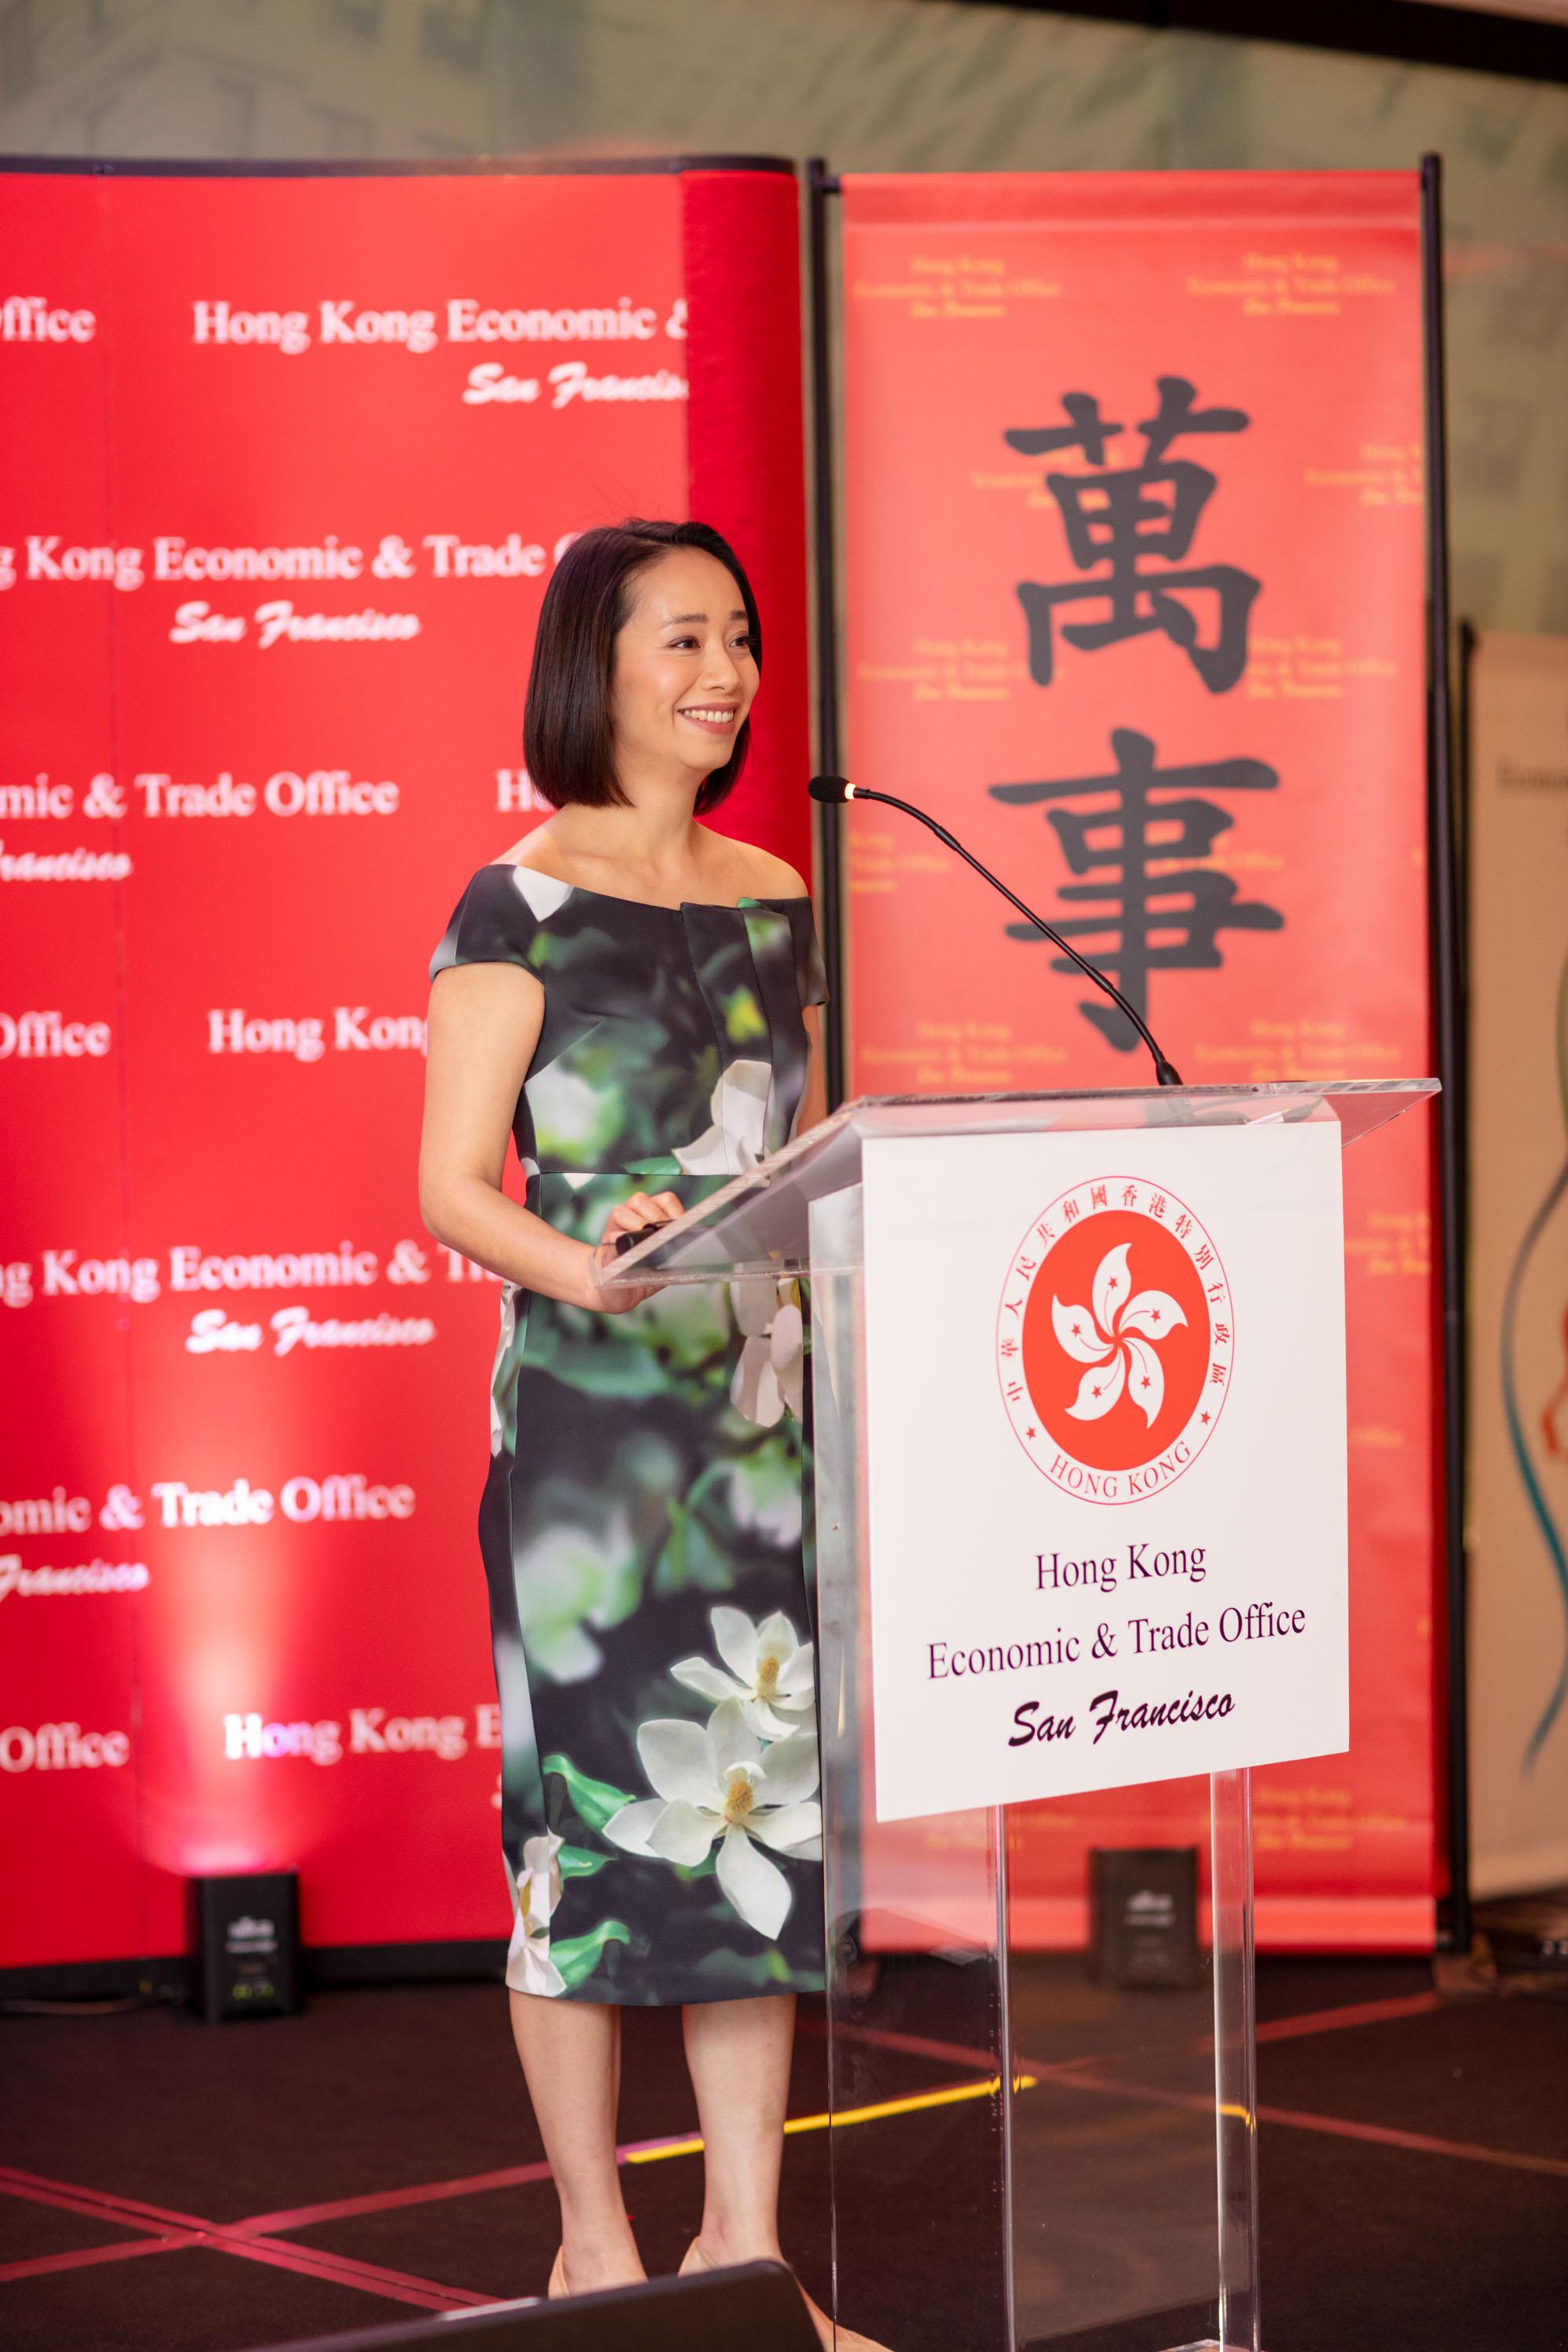 The Director of the Hong Kong Economic and Trade Office in San Francisco, Ms Jacko Tsang, speaks at the spring reception in Houston, Texas, on March 1 (Houston time).